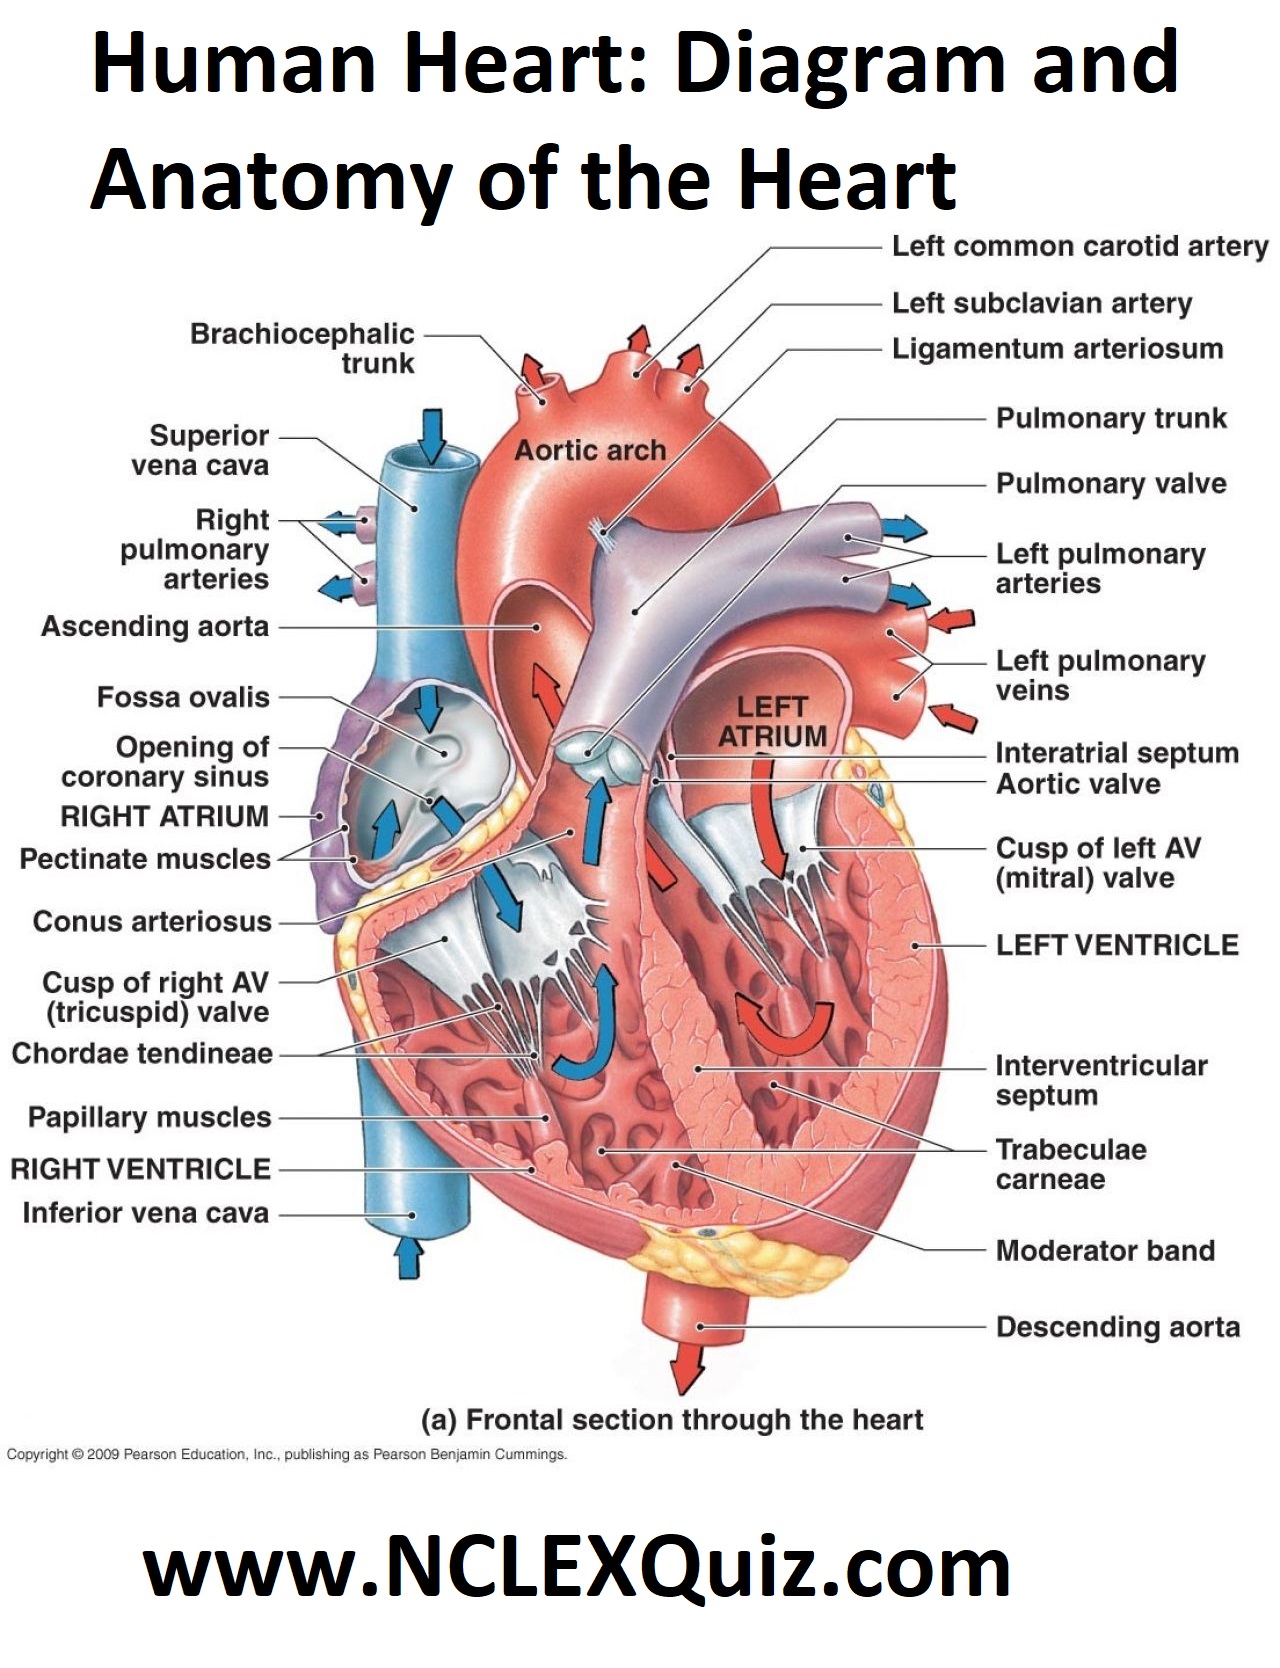 Human Heart: Diagram and Anatomy of the Heart - StudyPK